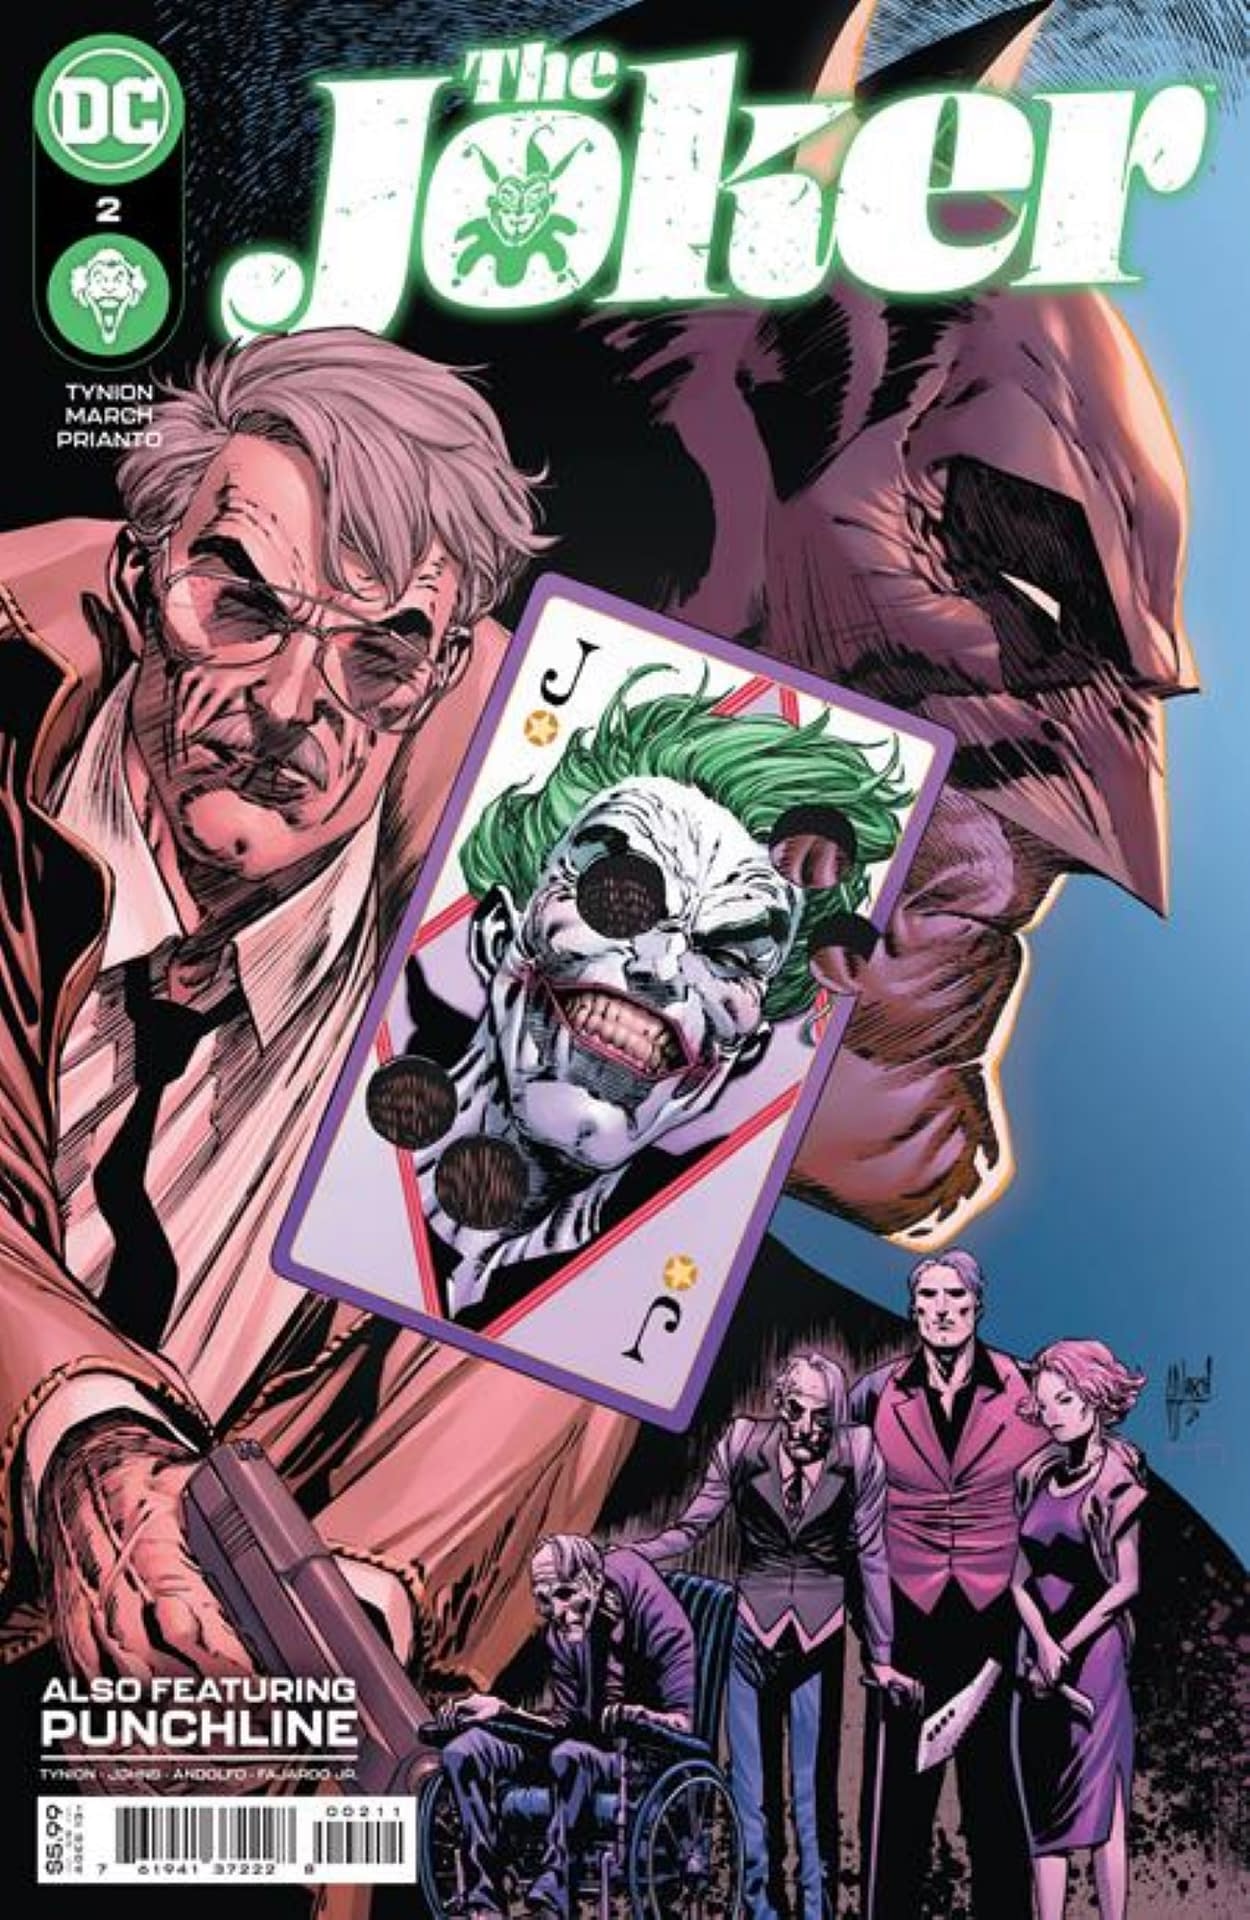 The Joker #2 - First 40-Page DC Comic To Go To $6 - But Not Batman